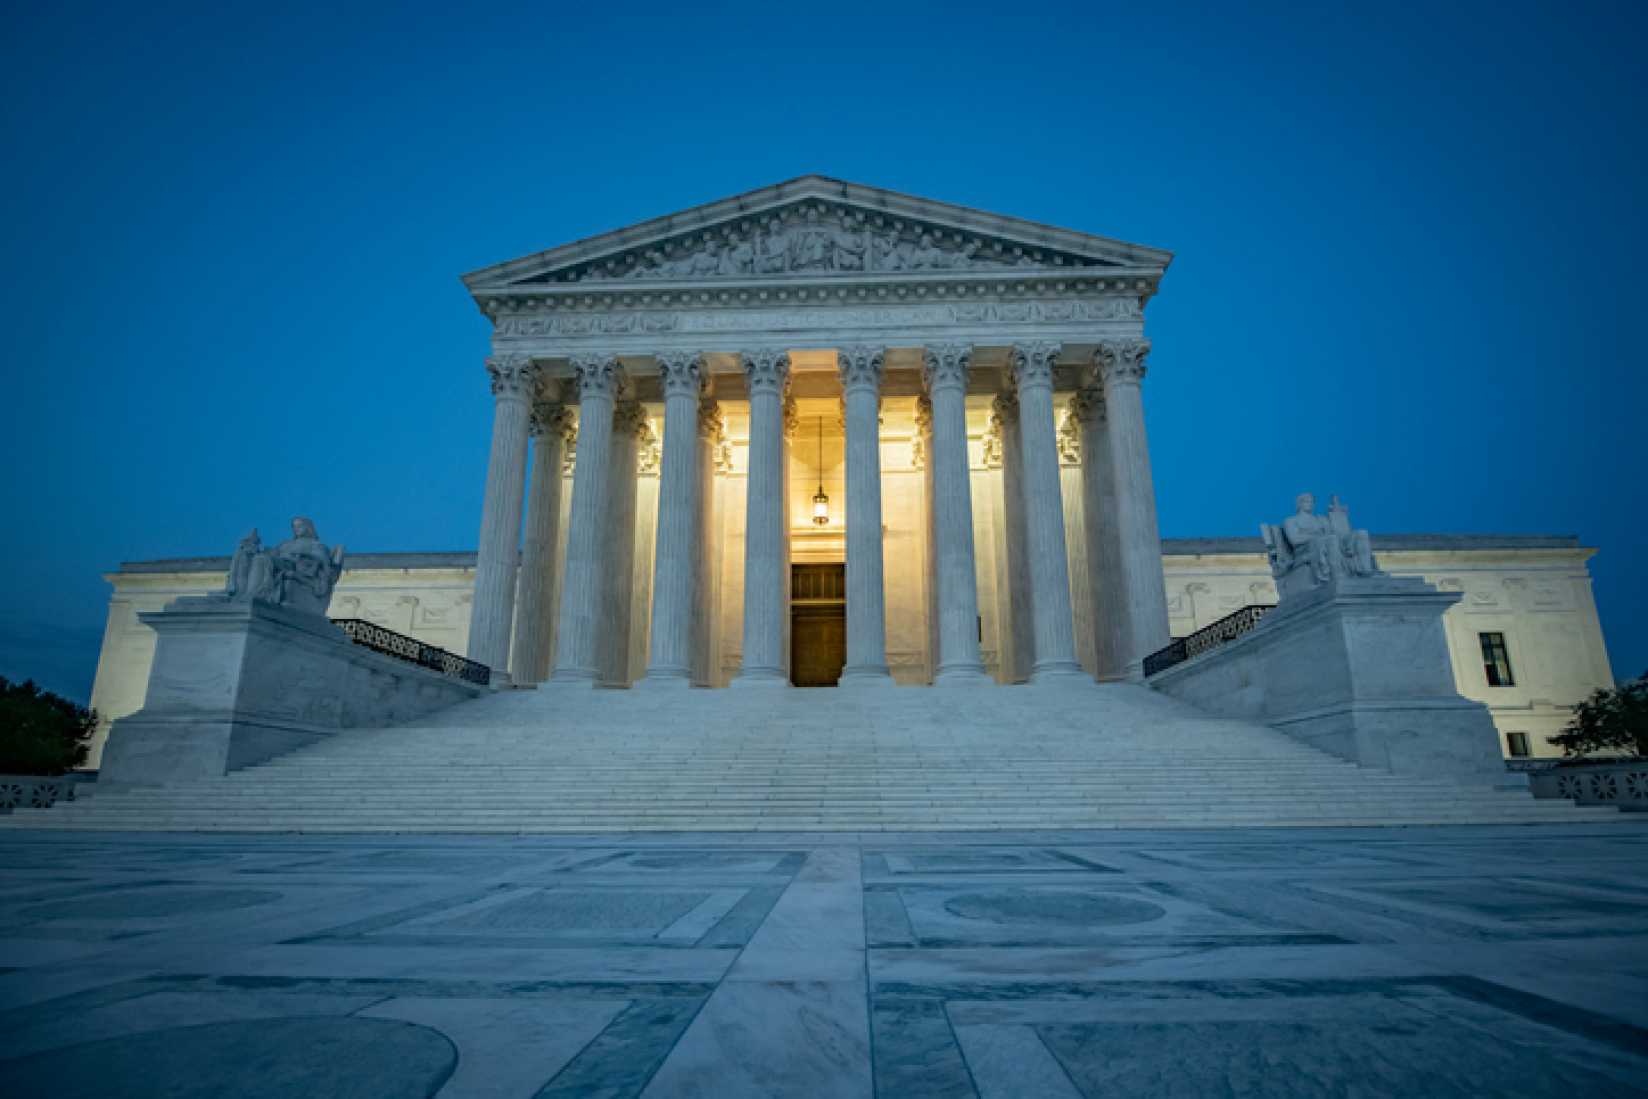 The U.S. Supreme Court building at night